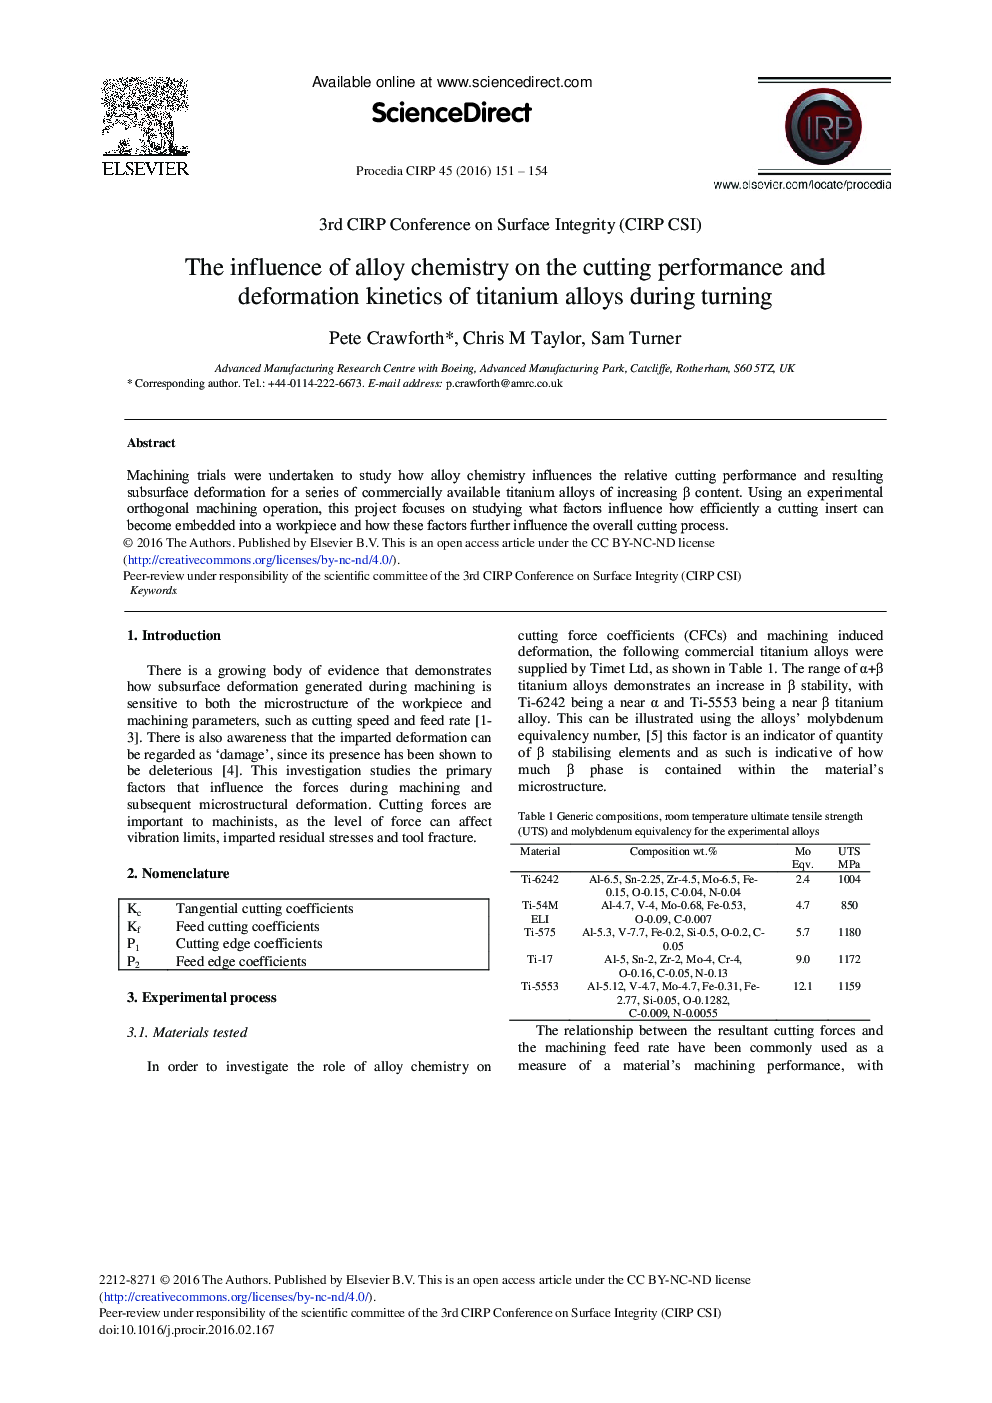 The Influence of Alloy Chemistry on the Cutting Performance and Deformation Kinetics of Titanium Alloys During Turning 